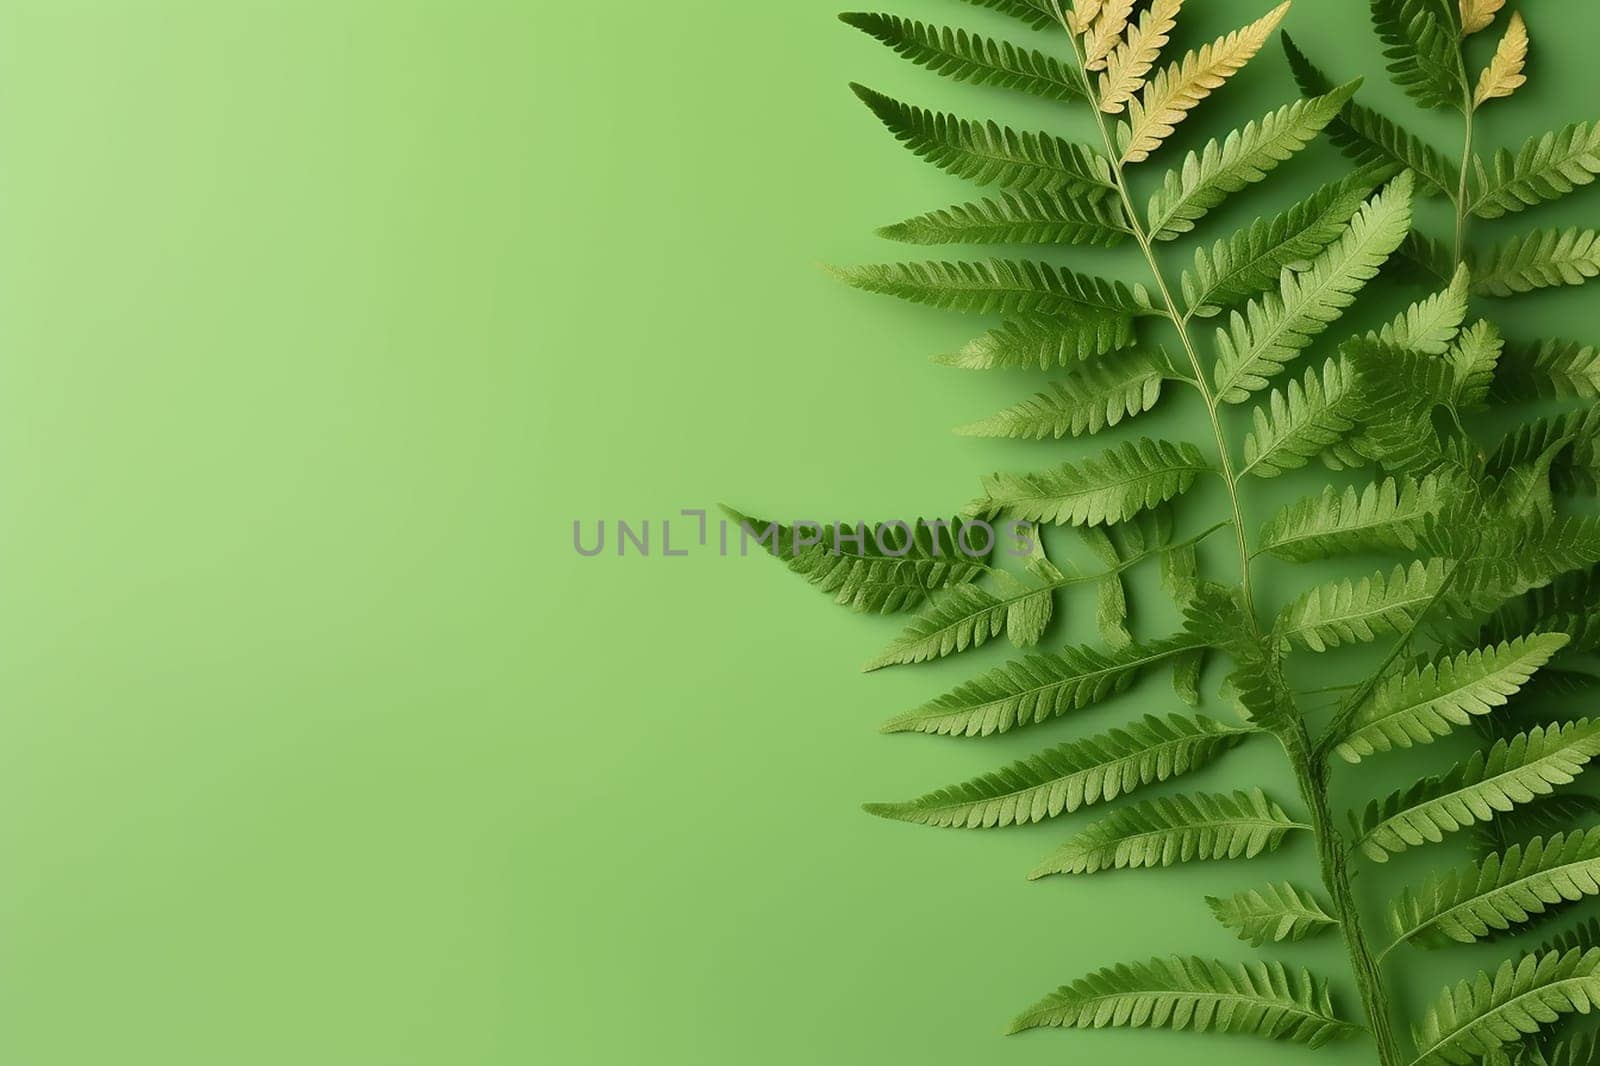 Lush green fern leaves against a solid green backdrop.